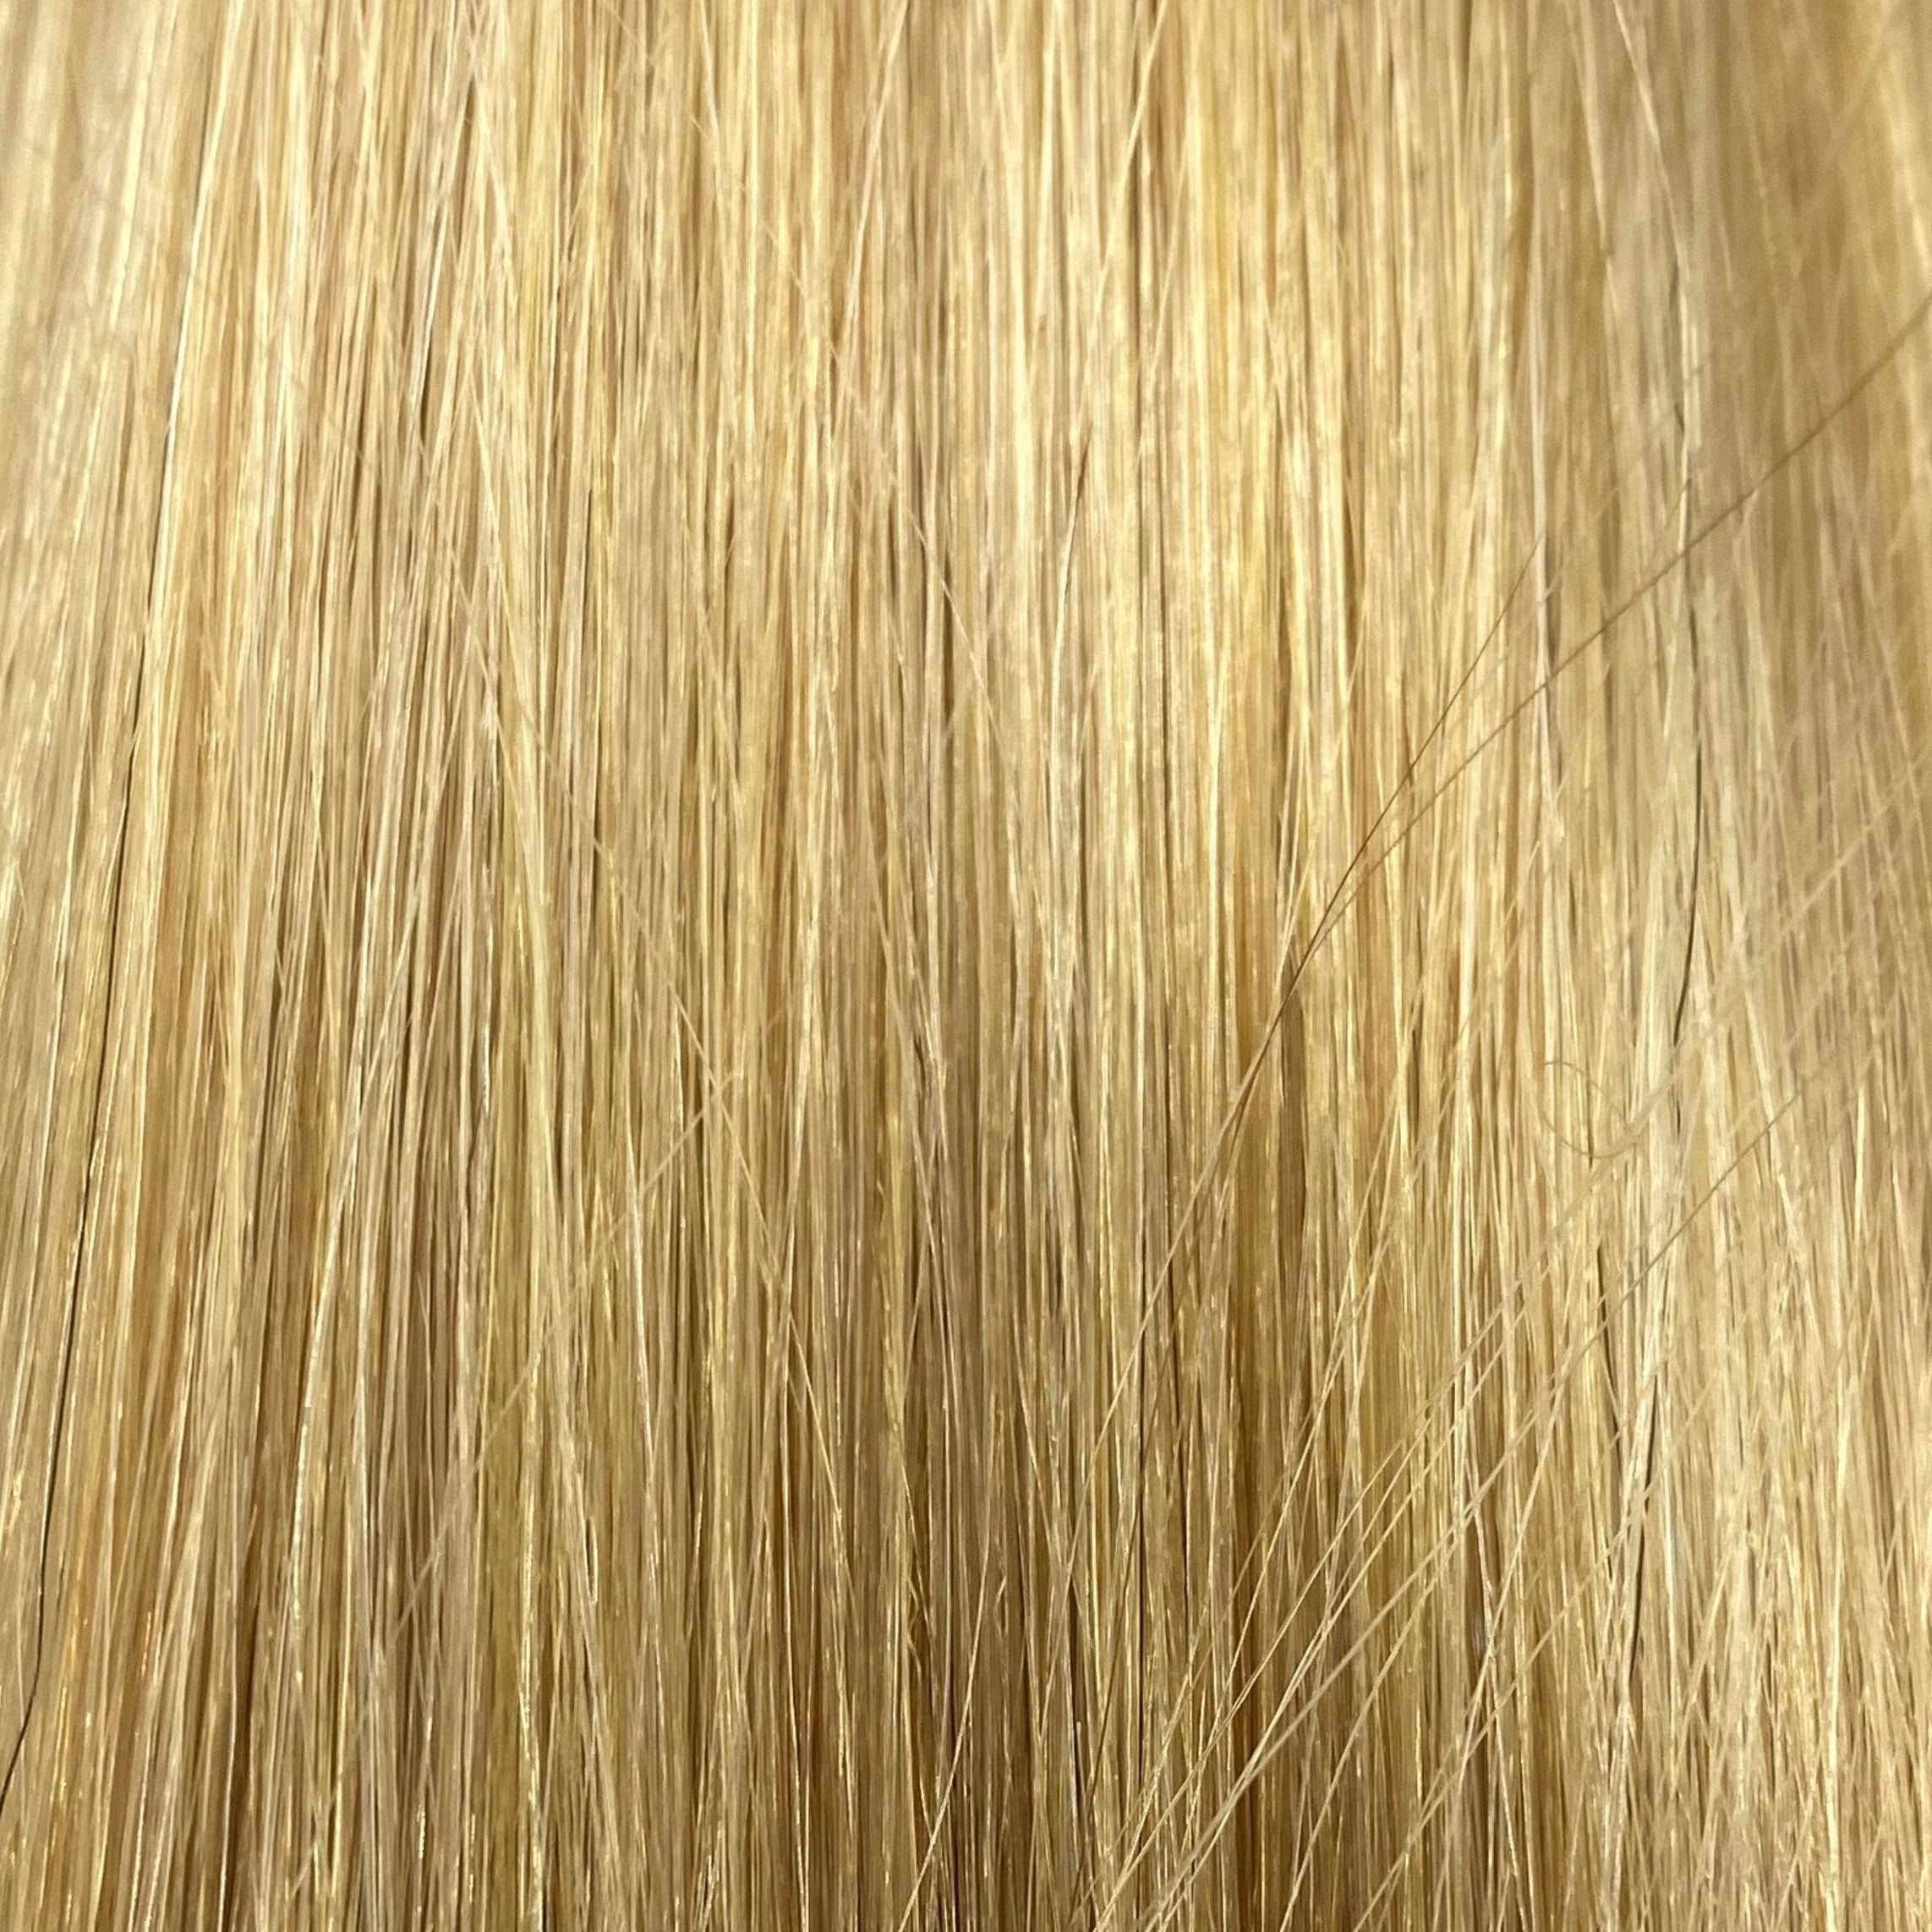 FUSION HIGHLIGHT #140 GOLDEN ULTRA BLONDE 40CM/ 16 INCHES  - 17.5 GRAMS